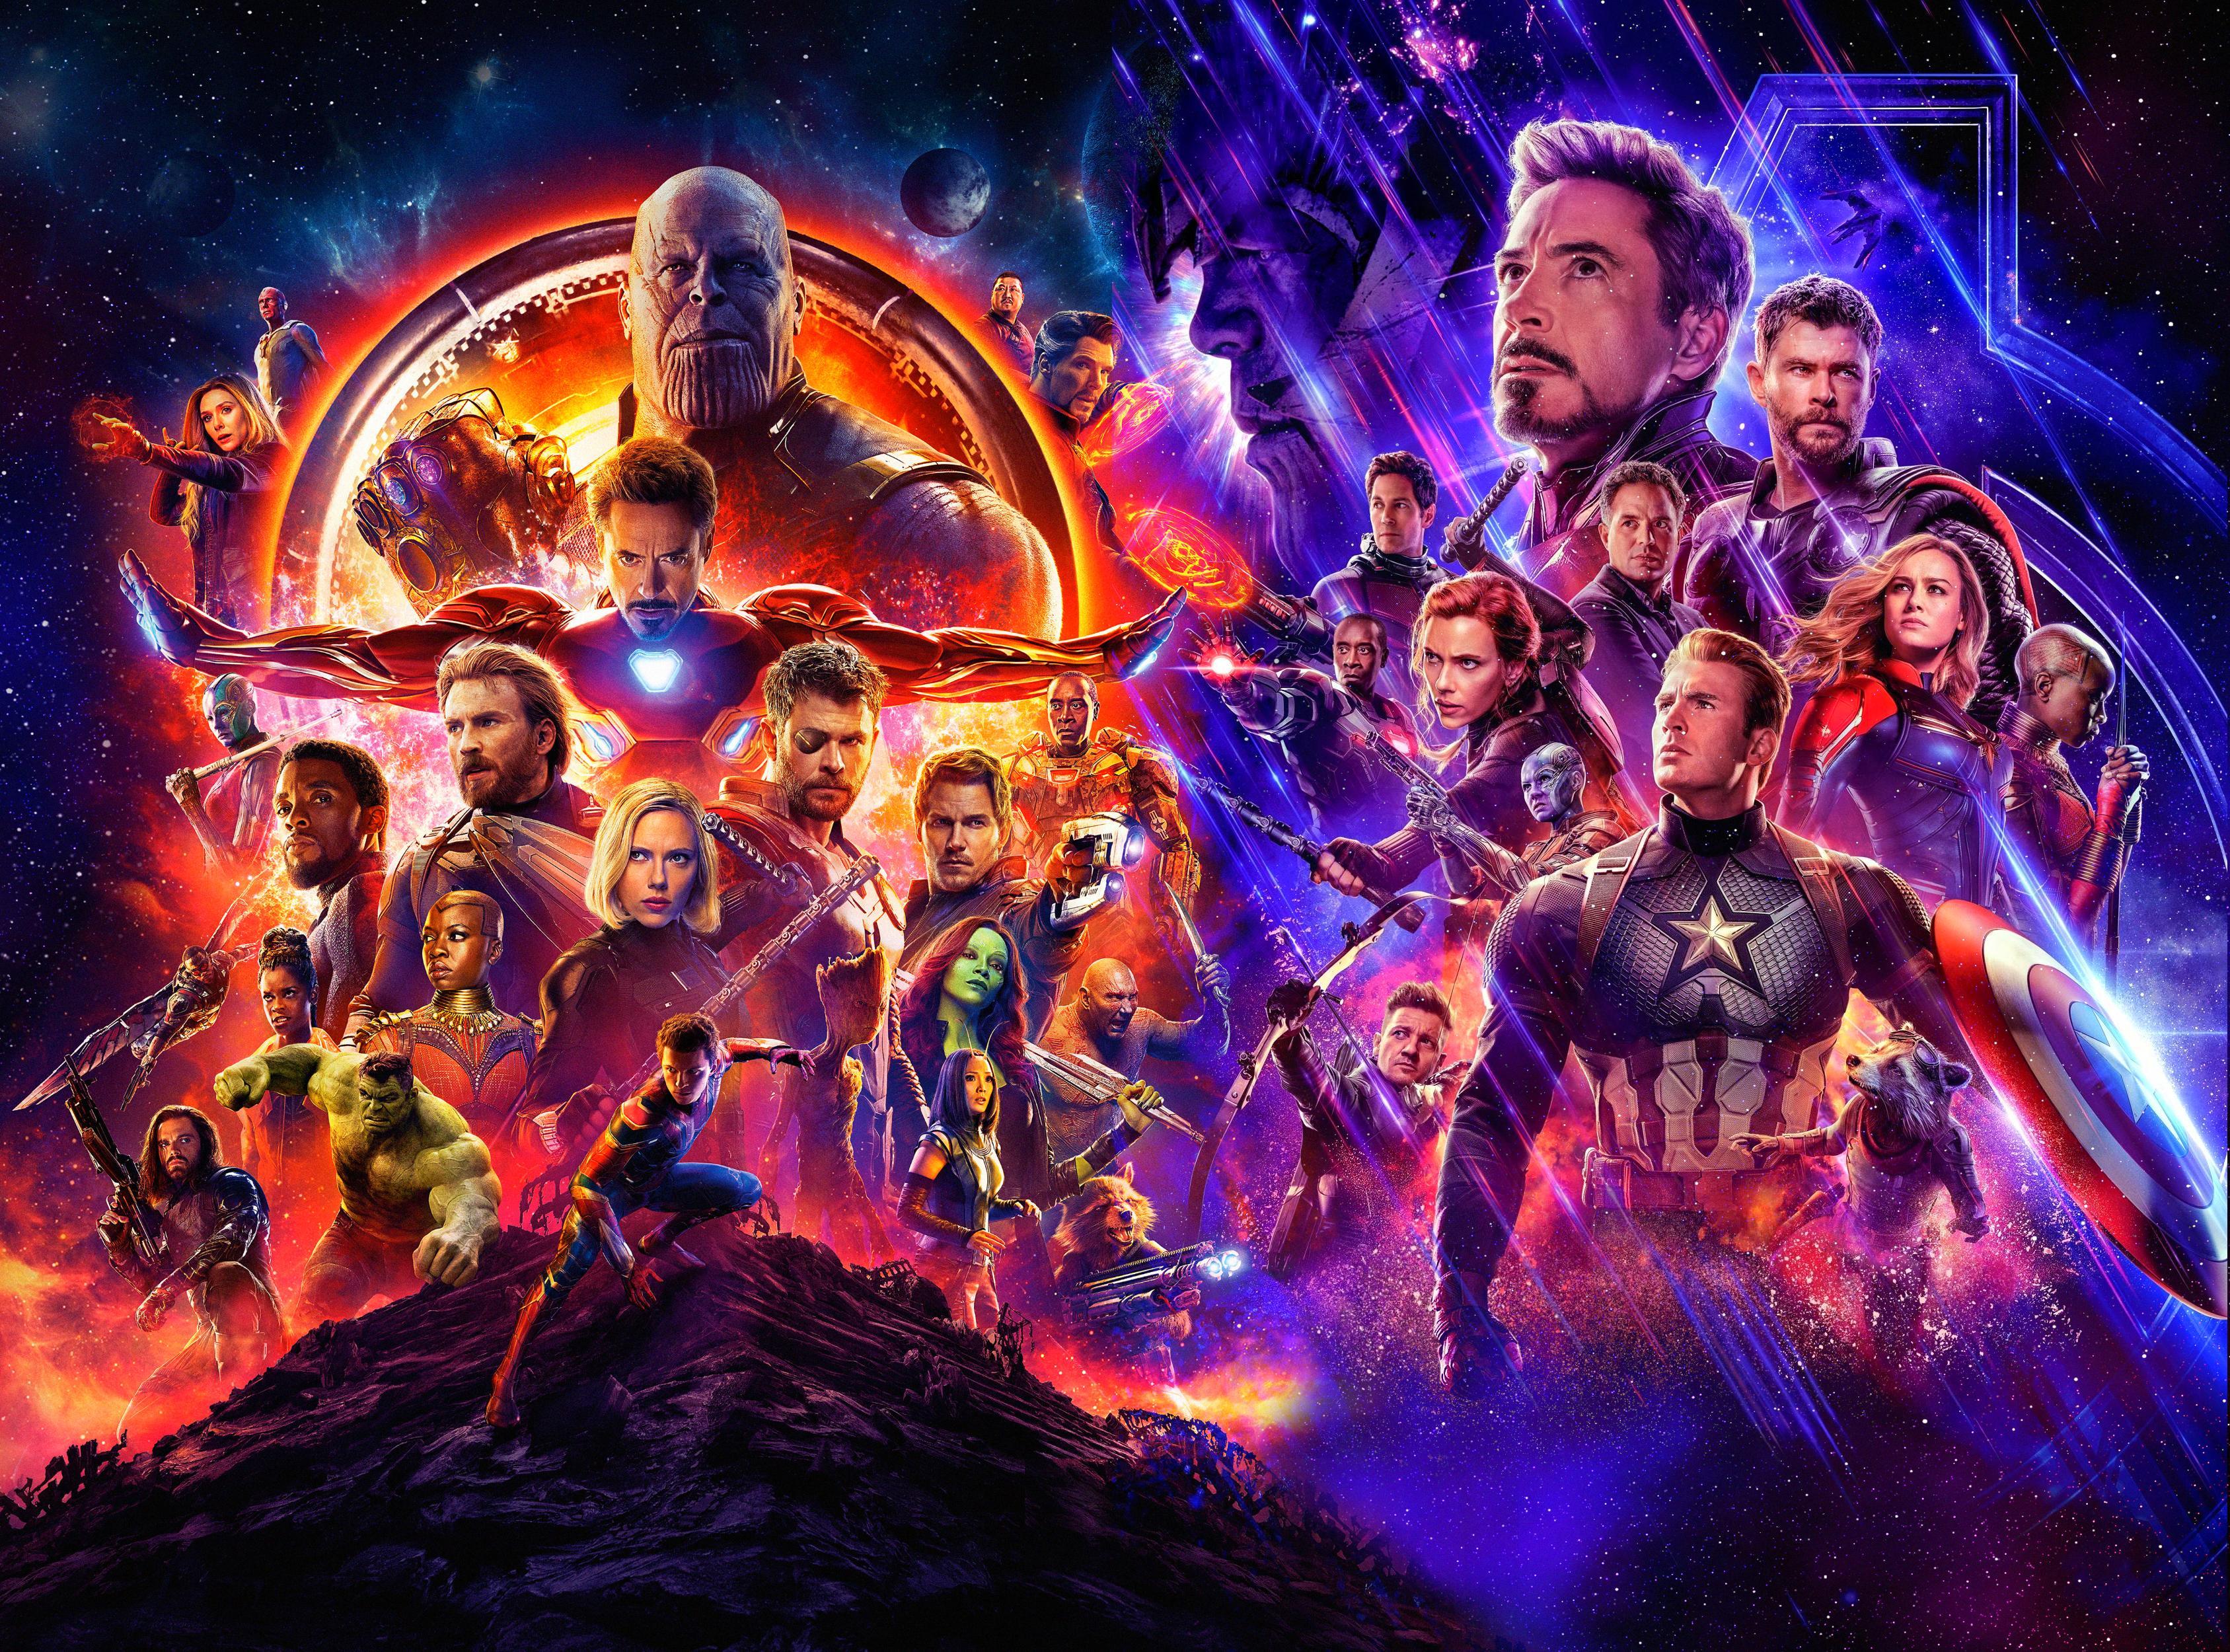 Gaming Wallpapers For Android - Avengers Infinity War Avengers Endgame , HD Wallpaper & Backgrounds